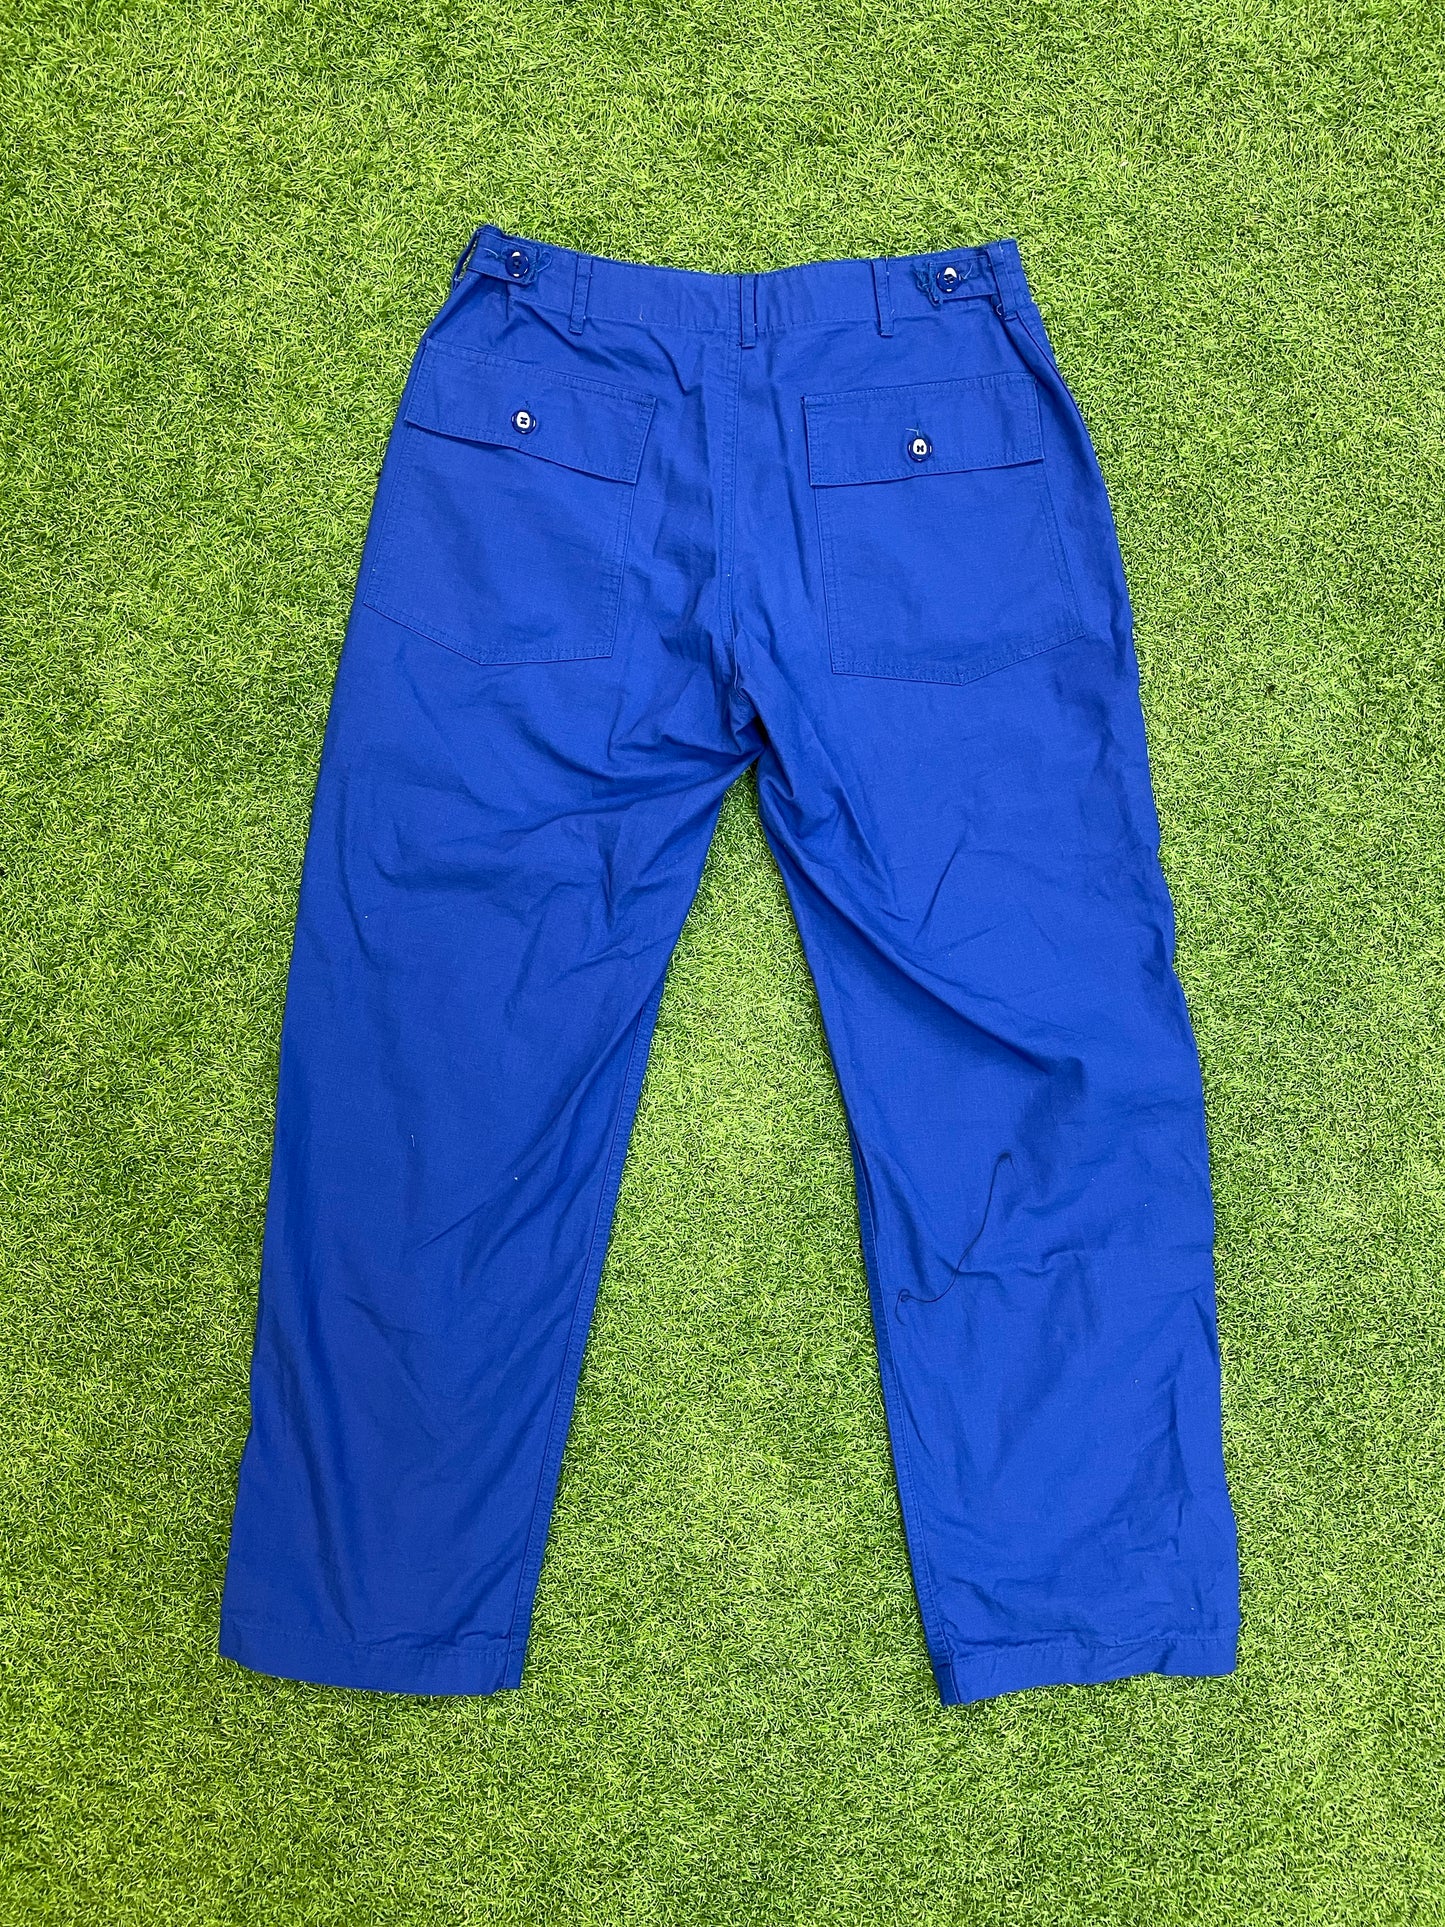 Engineered Garments Workaday Military Style Pant